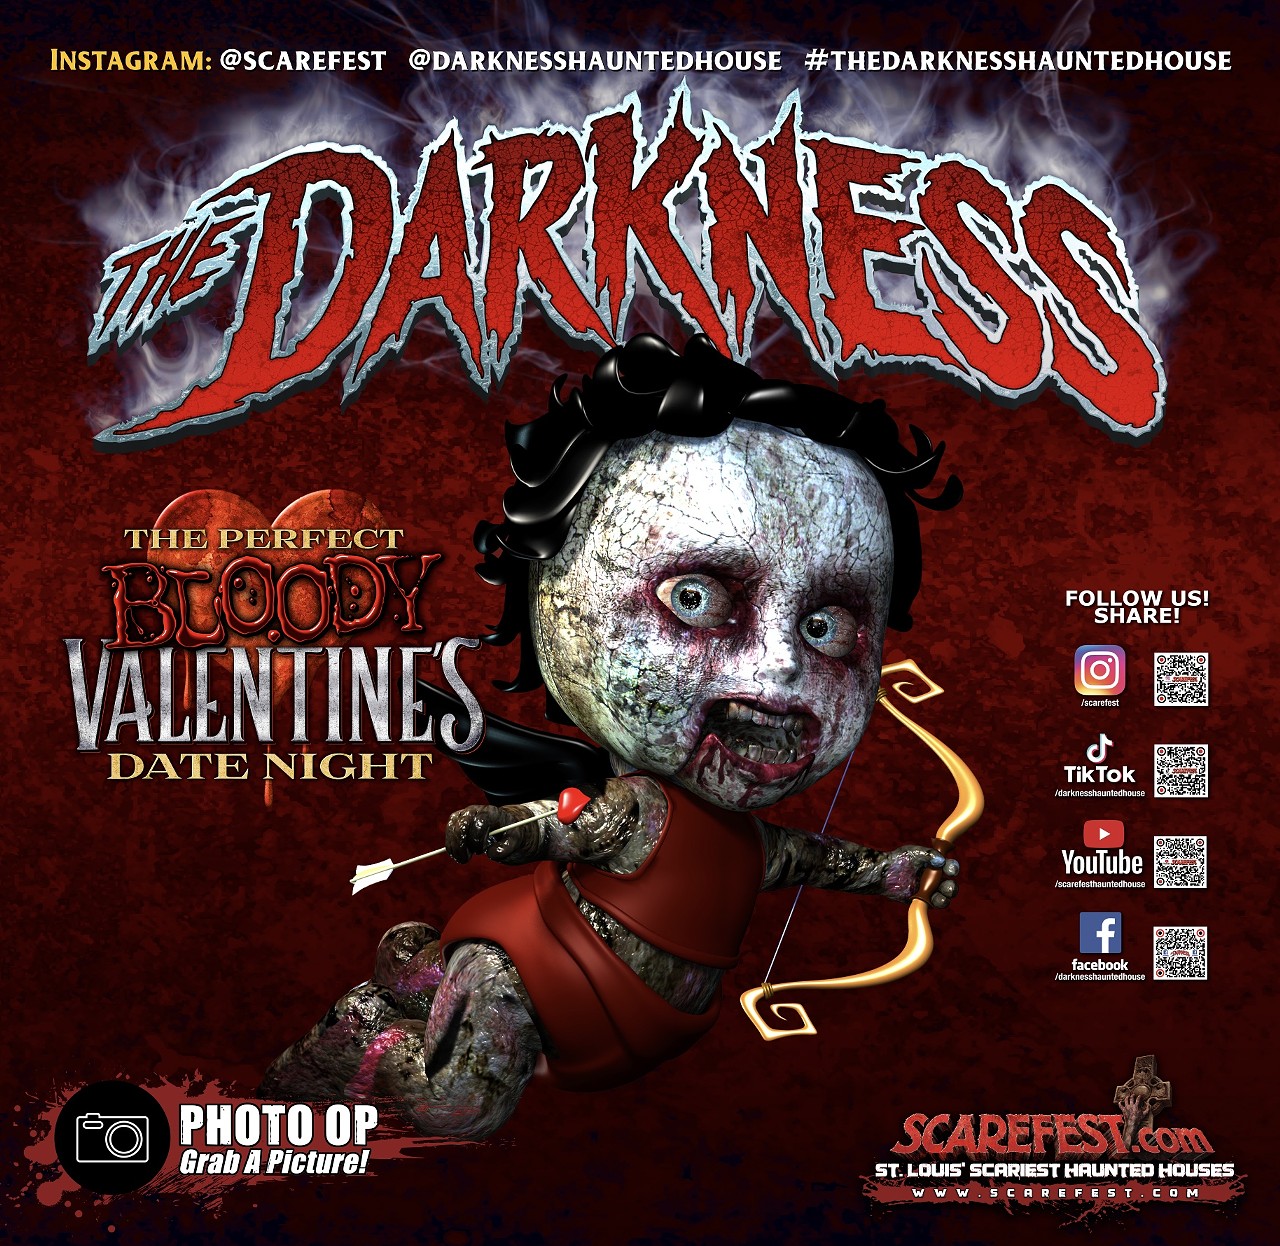 The Darkness Haunted House&rsquo;s My Bloody Valentine
Nothing says I love you like the Darkness (1525 South 8th Street), right? On Saturday, February 17, the Darkness Haunted House&rsquo;s My Bloody Valentine event will make your date scream, with all-new renovated scenes, animations and more. From 6 to 9 p.m., the horror-filled evening will provide guests with the scariest date night of the year, complete with festive Valentine&rsquo;s Day candies and free photo opportunities (got to keep some of the romance alive). This limited-ticket night is open to the first 1,250 guests with tickets costing $34.95. For an extra $5, try the new five-minute serial killer escape feature and see if you and your sweetie will survive the holiday. To purchase tickets, visit the Darkness&rsquo; website.